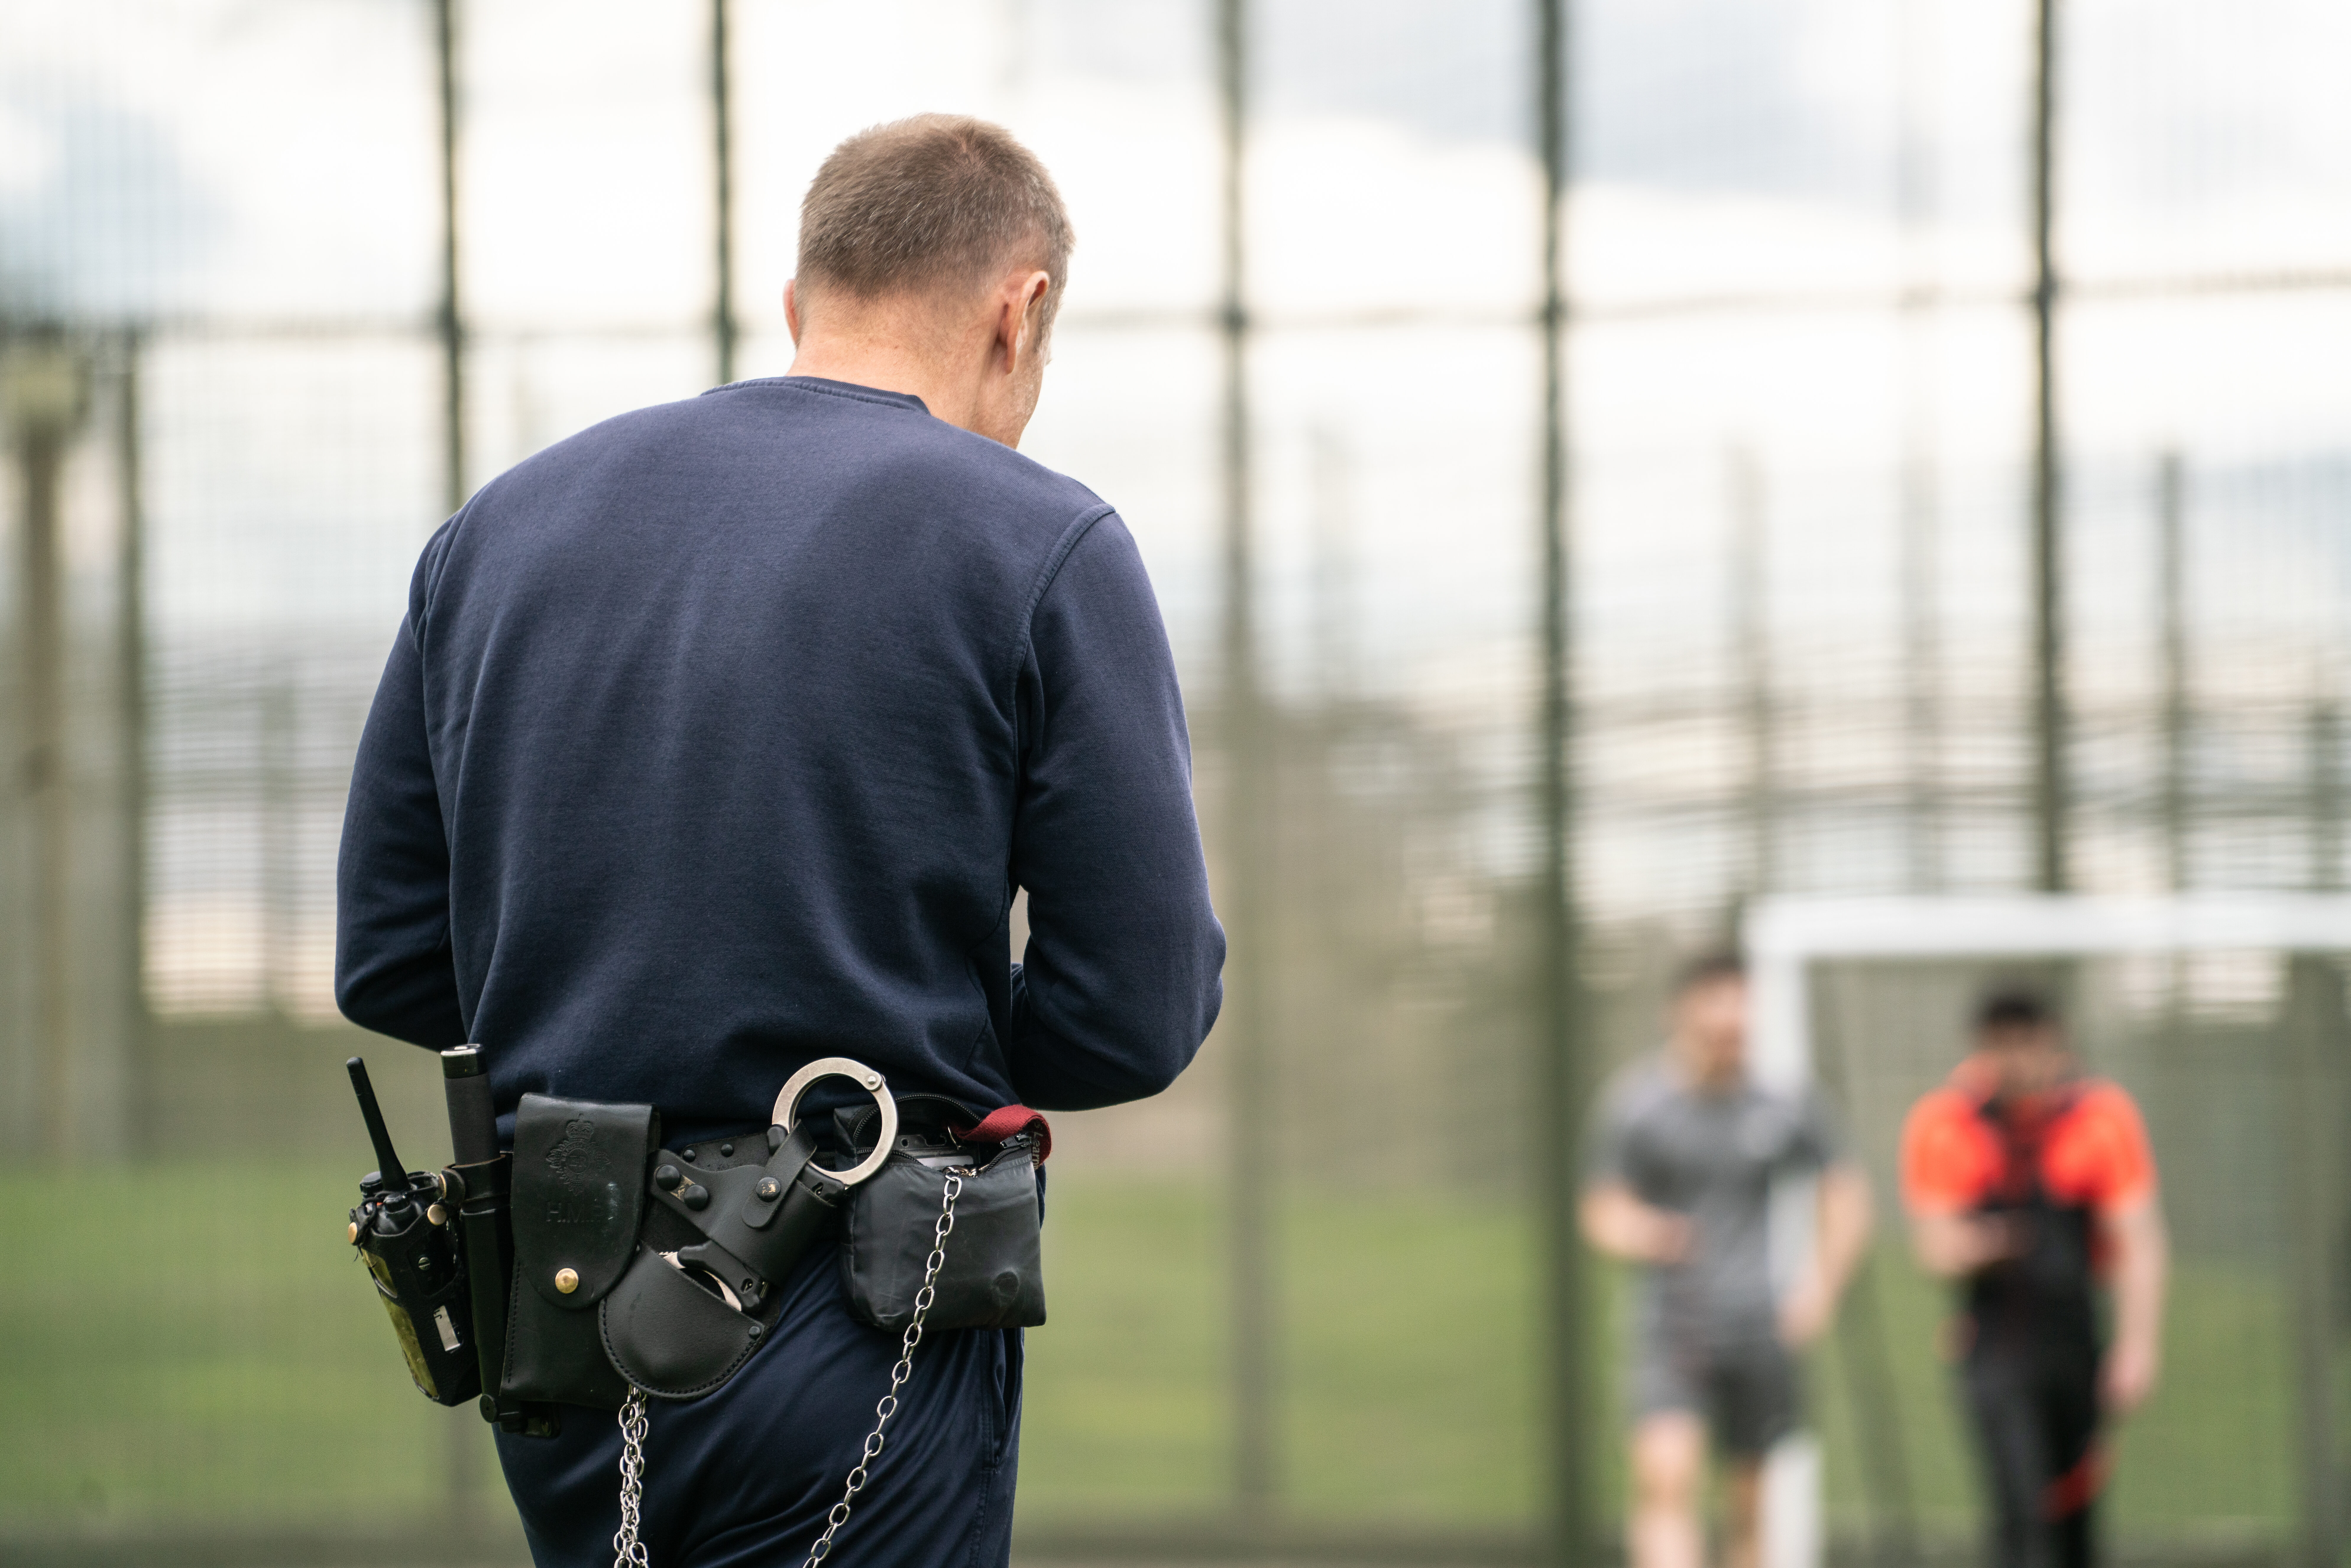 A prison officer supervising some young offenders while they play football. He has his back to the camera and we can see prison handcuffs on his belt.